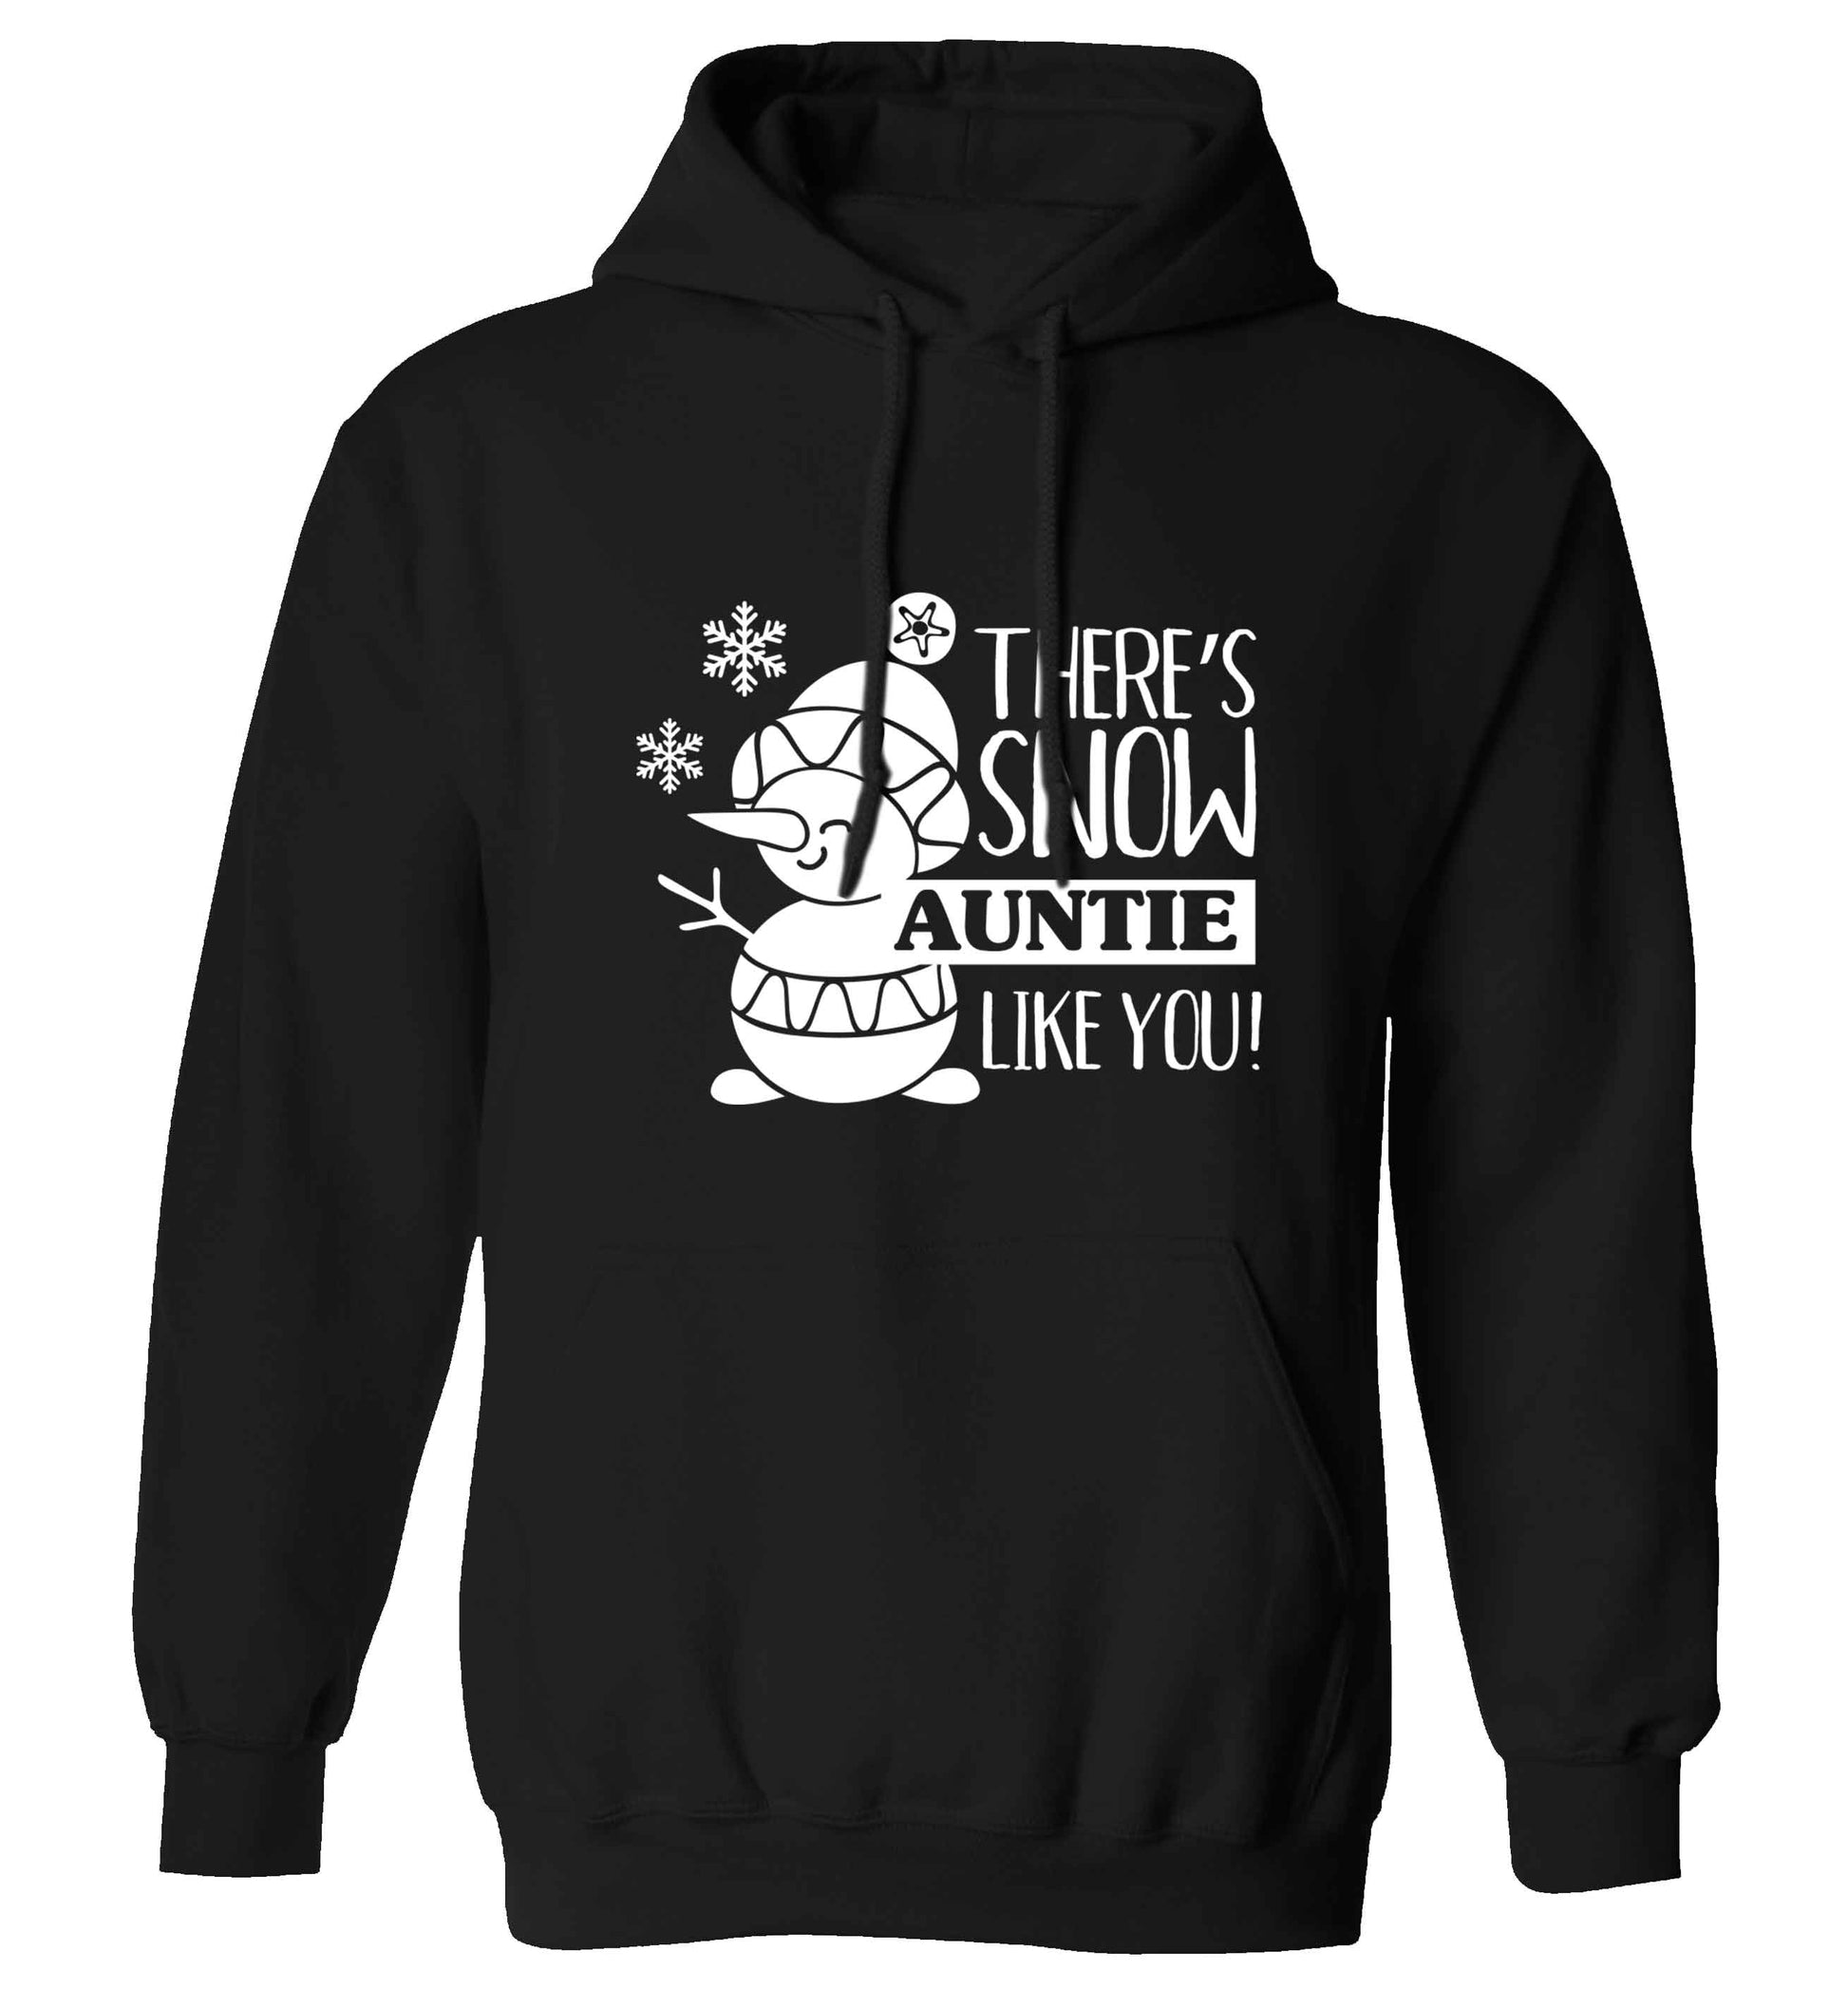 There's snow auntie like you adults unisex black hoodie 2XL